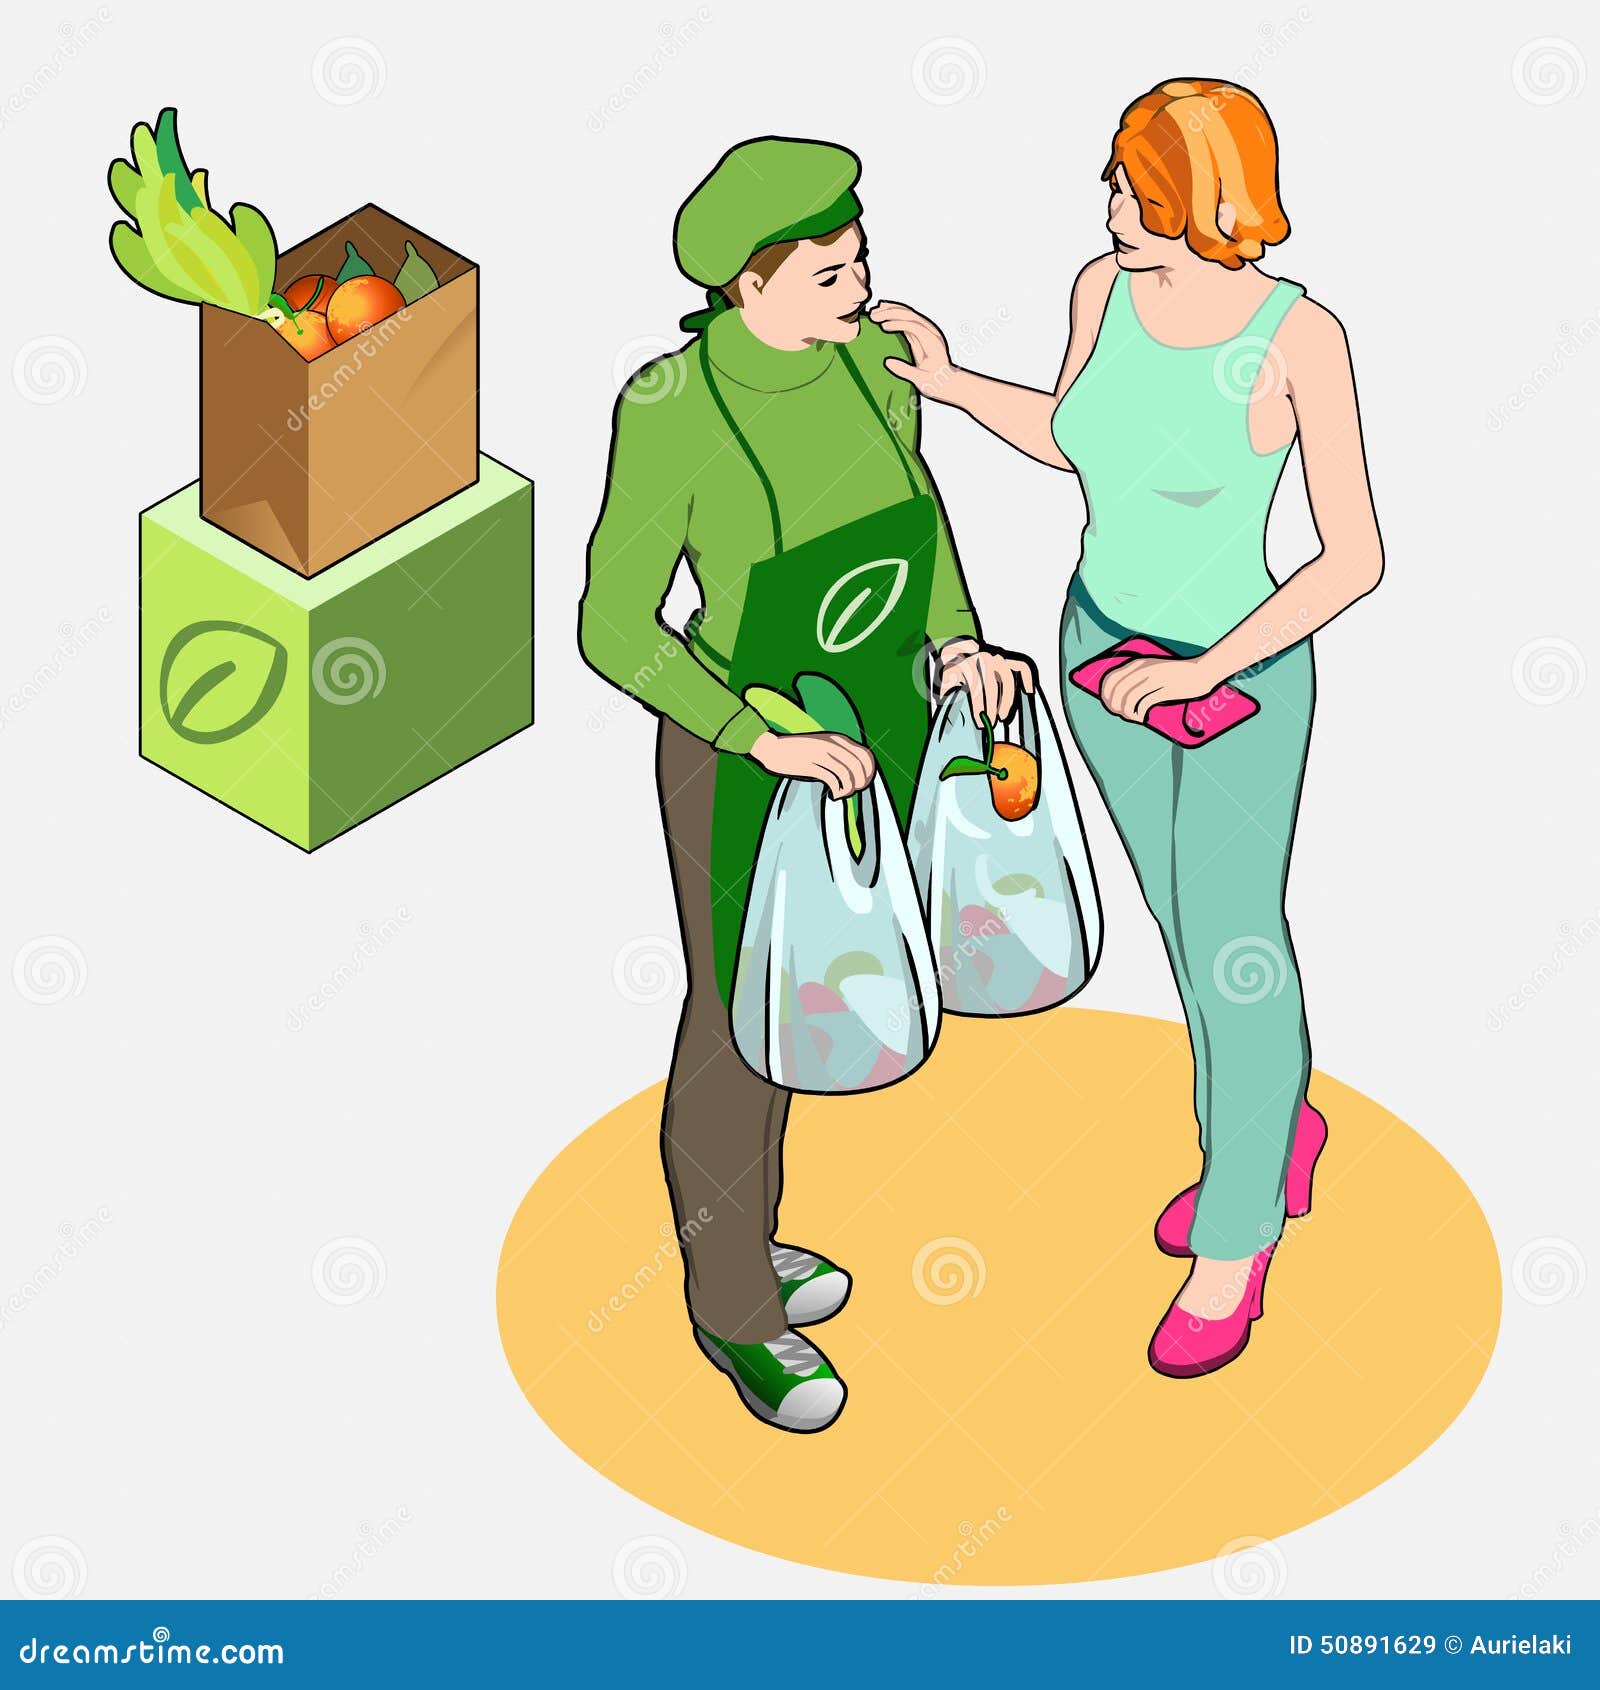 greengrocer clipart - photo #19